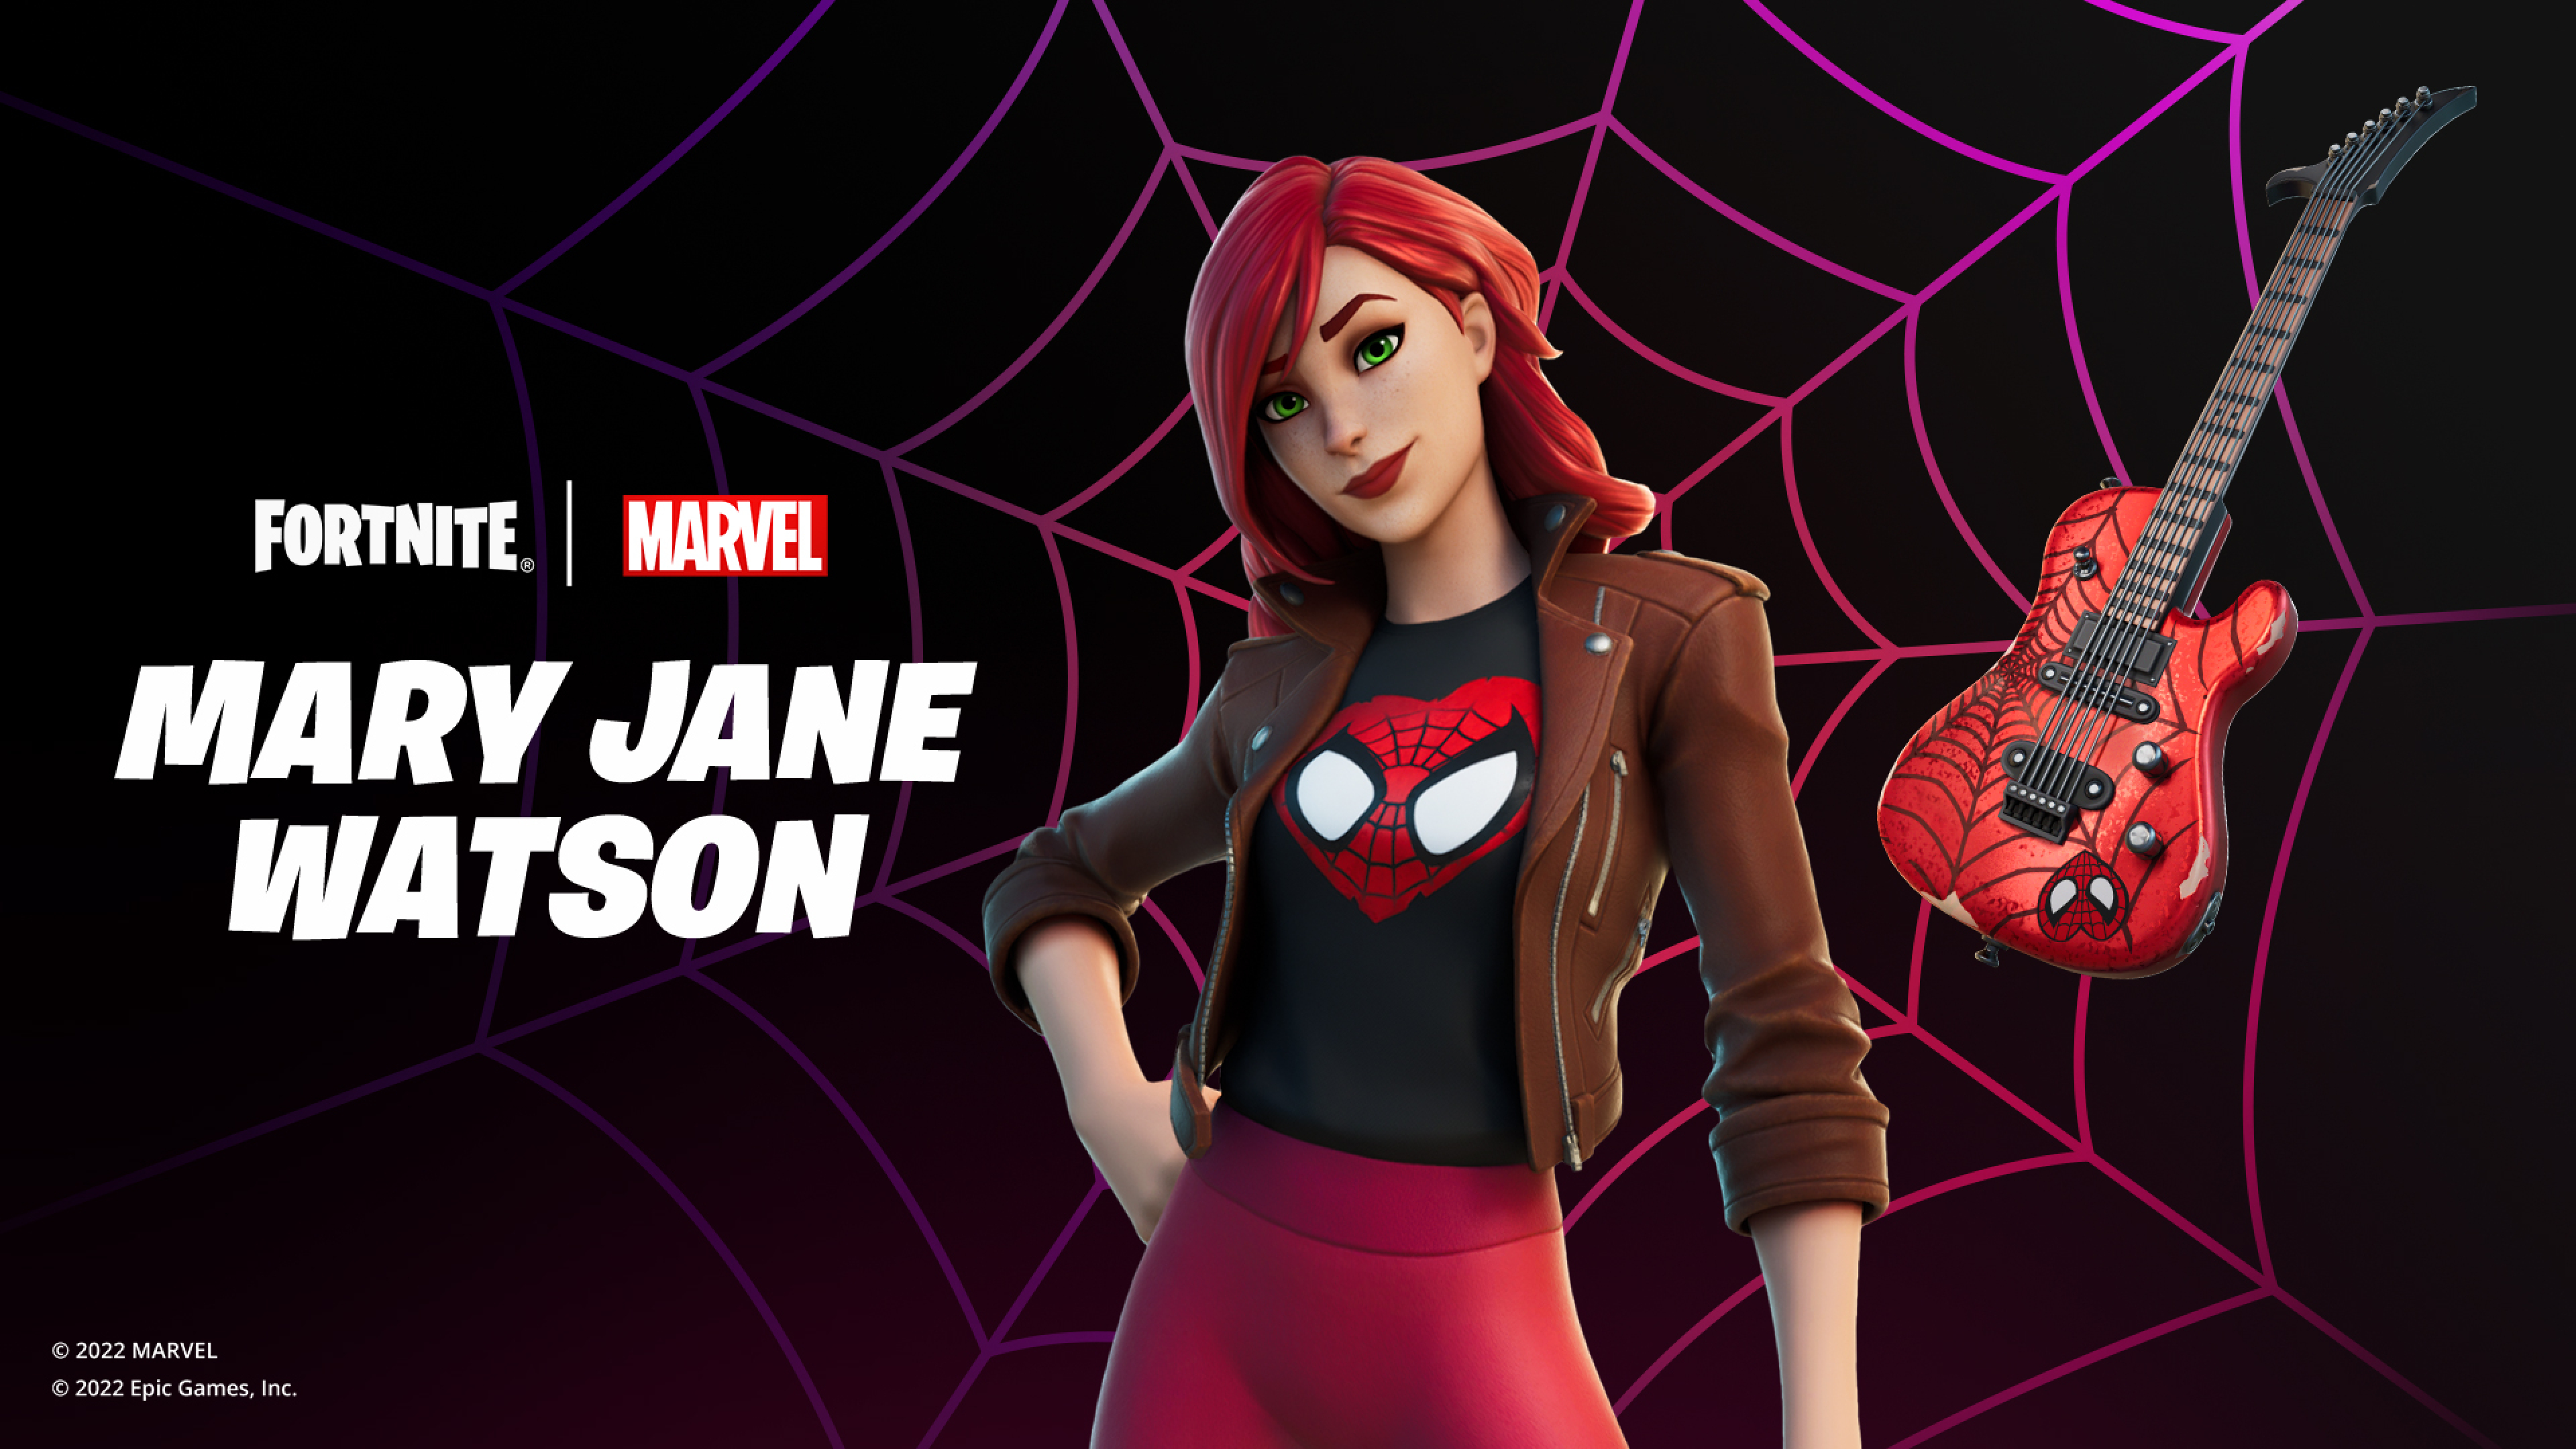 Spiderman and Mary Jane Wallpaper by Franky4FingersX2 on DeviantArt